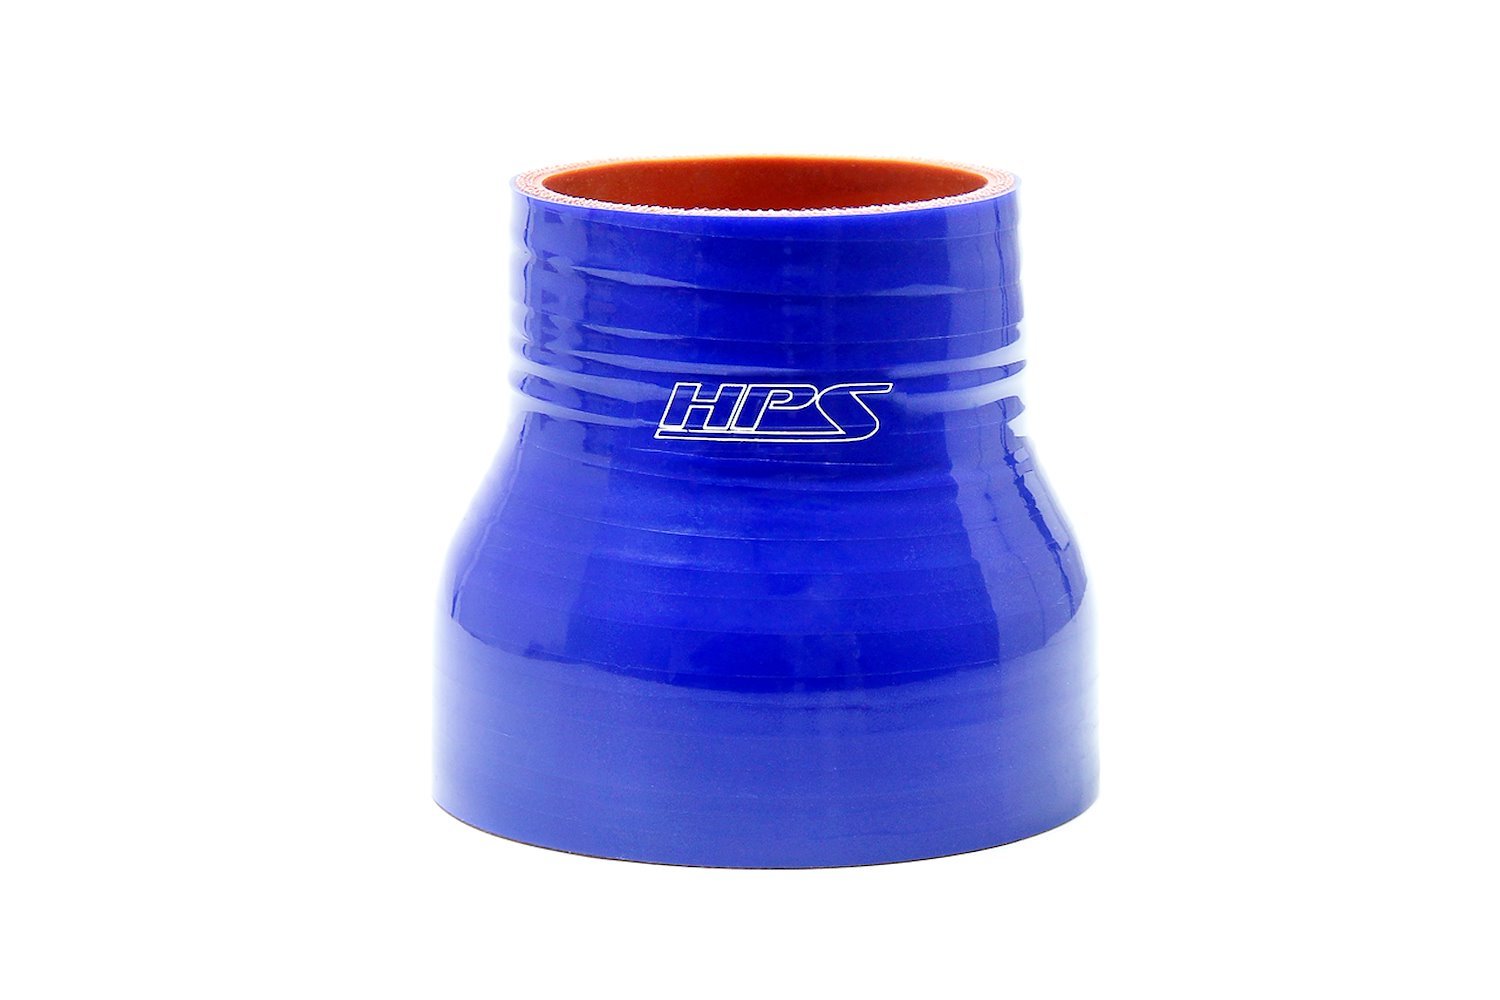 HTSR-325-350-L4-BLUE Silicone Reducer, High-Temp 4-Ply Reinforced, 3 1/4 in. ID To 3 1/2 in. ID, 4 in. Length.